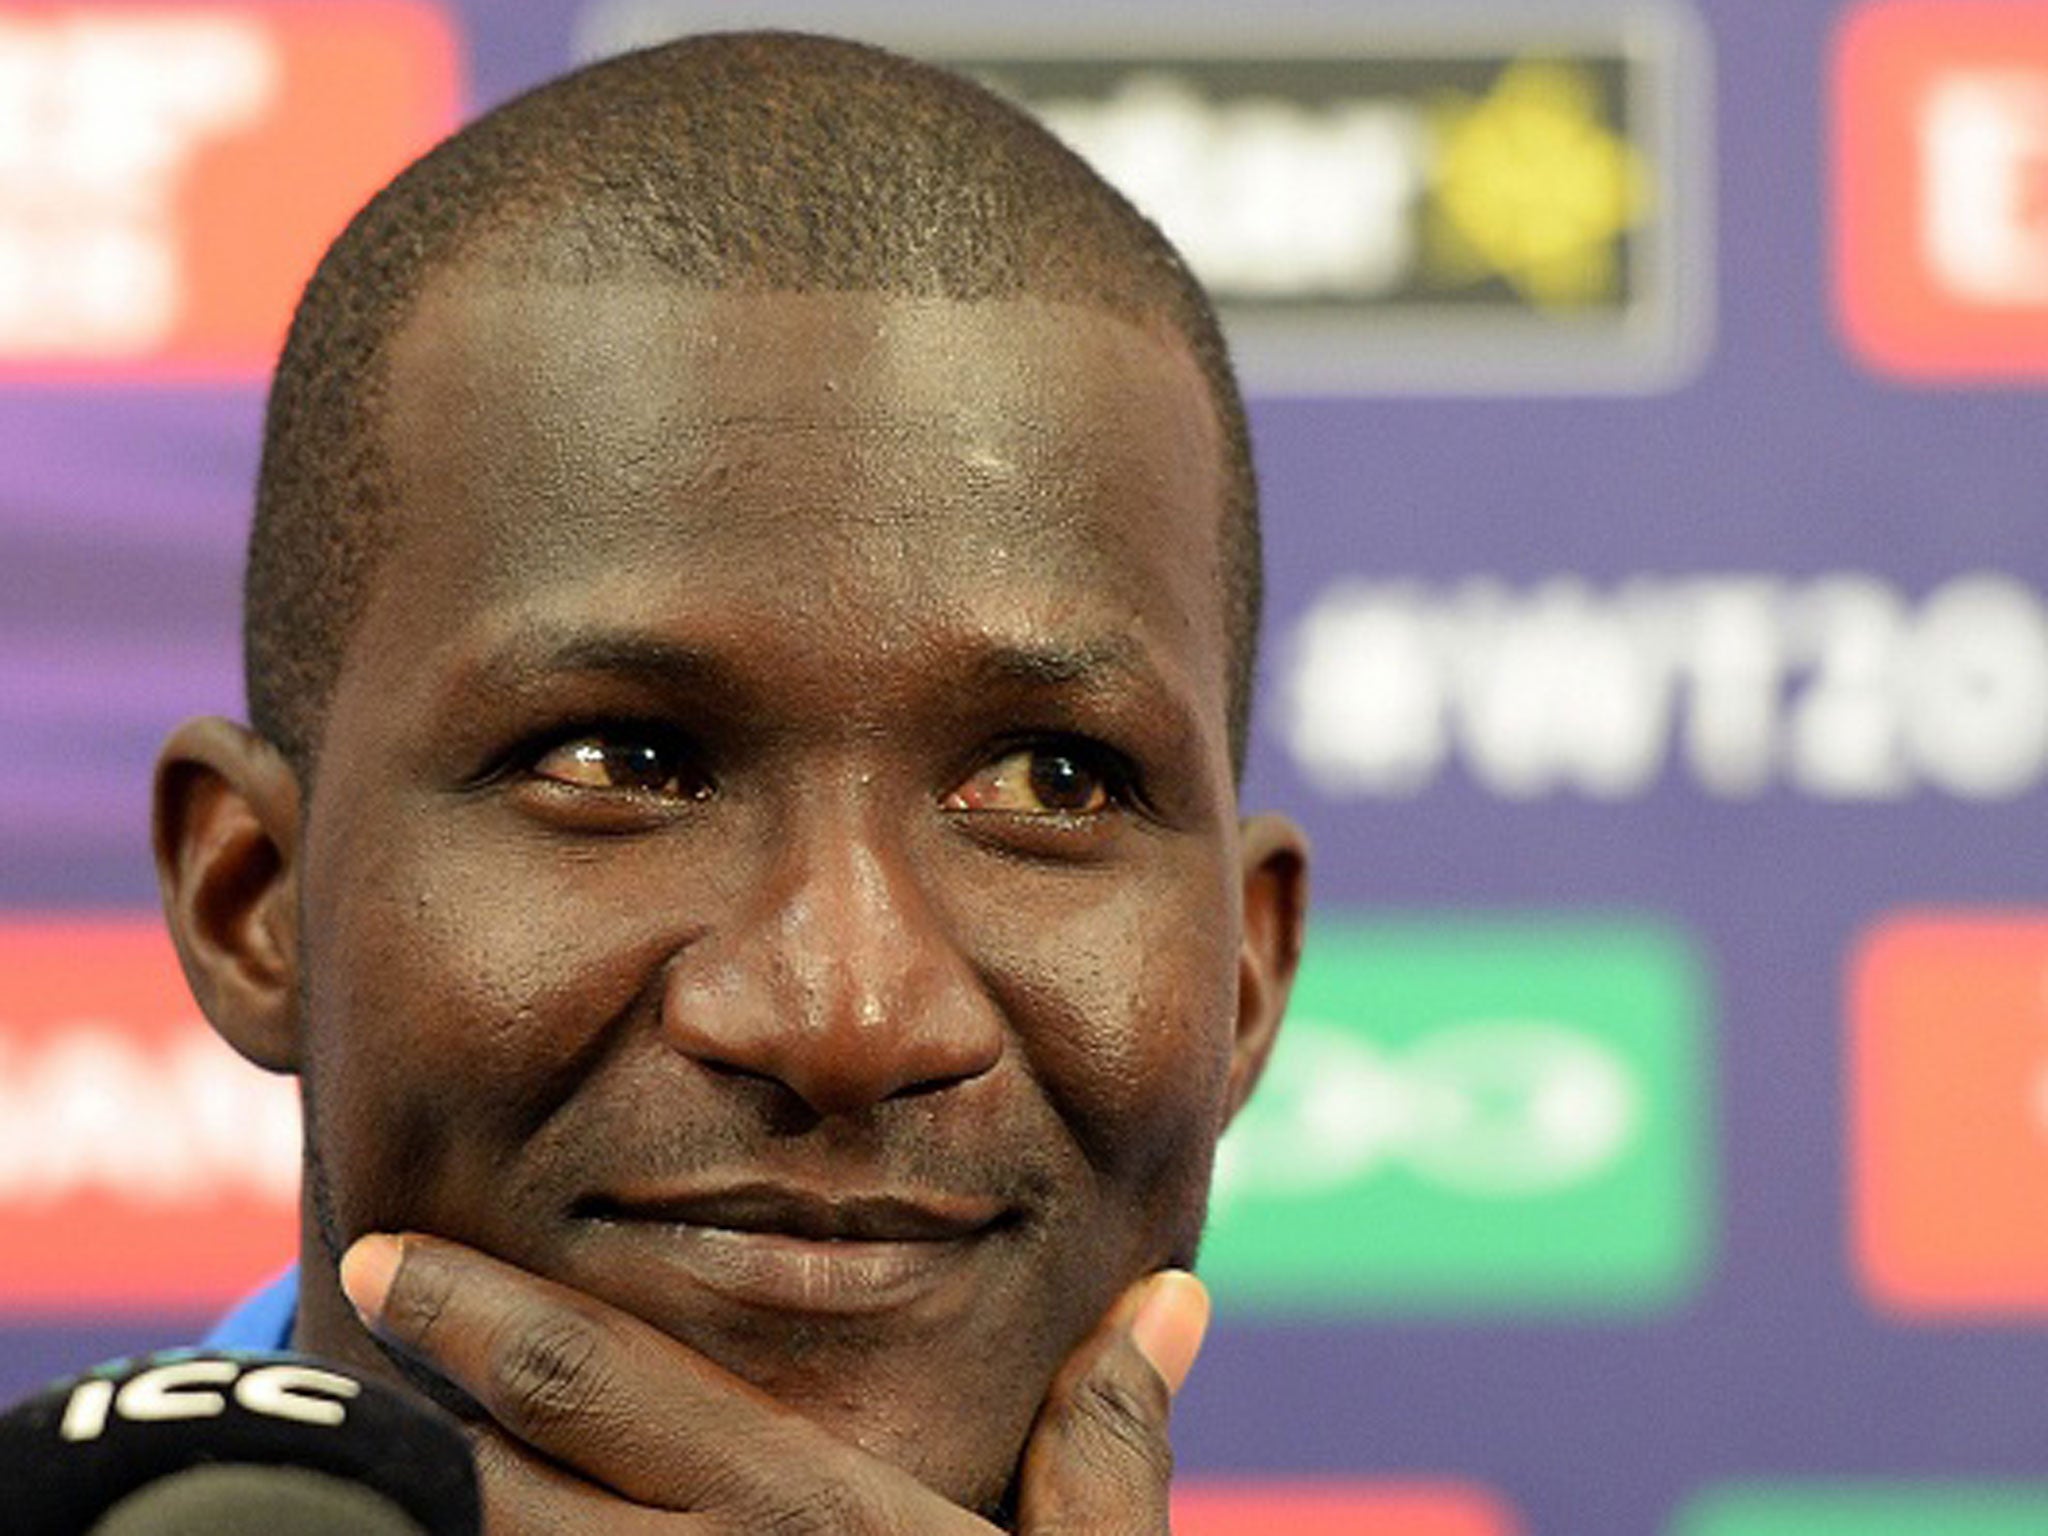 Darren Sammy has defended West Indies team-mate Chris Gayle after recent criticism for off-field events